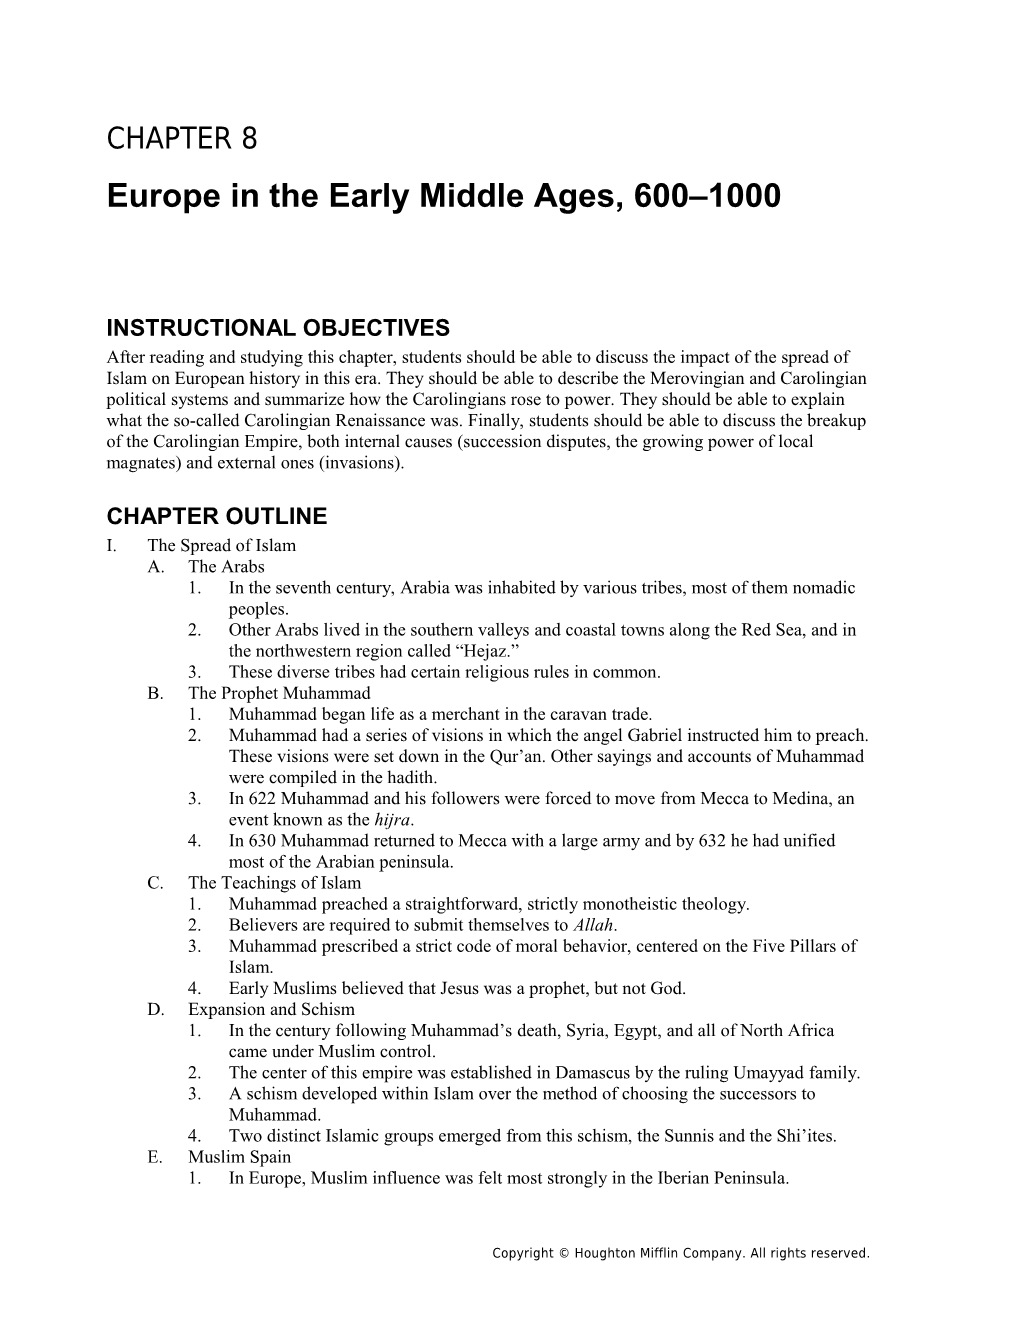 Chapter 8: Europe in the Early Middle Ages, 600 1000 1